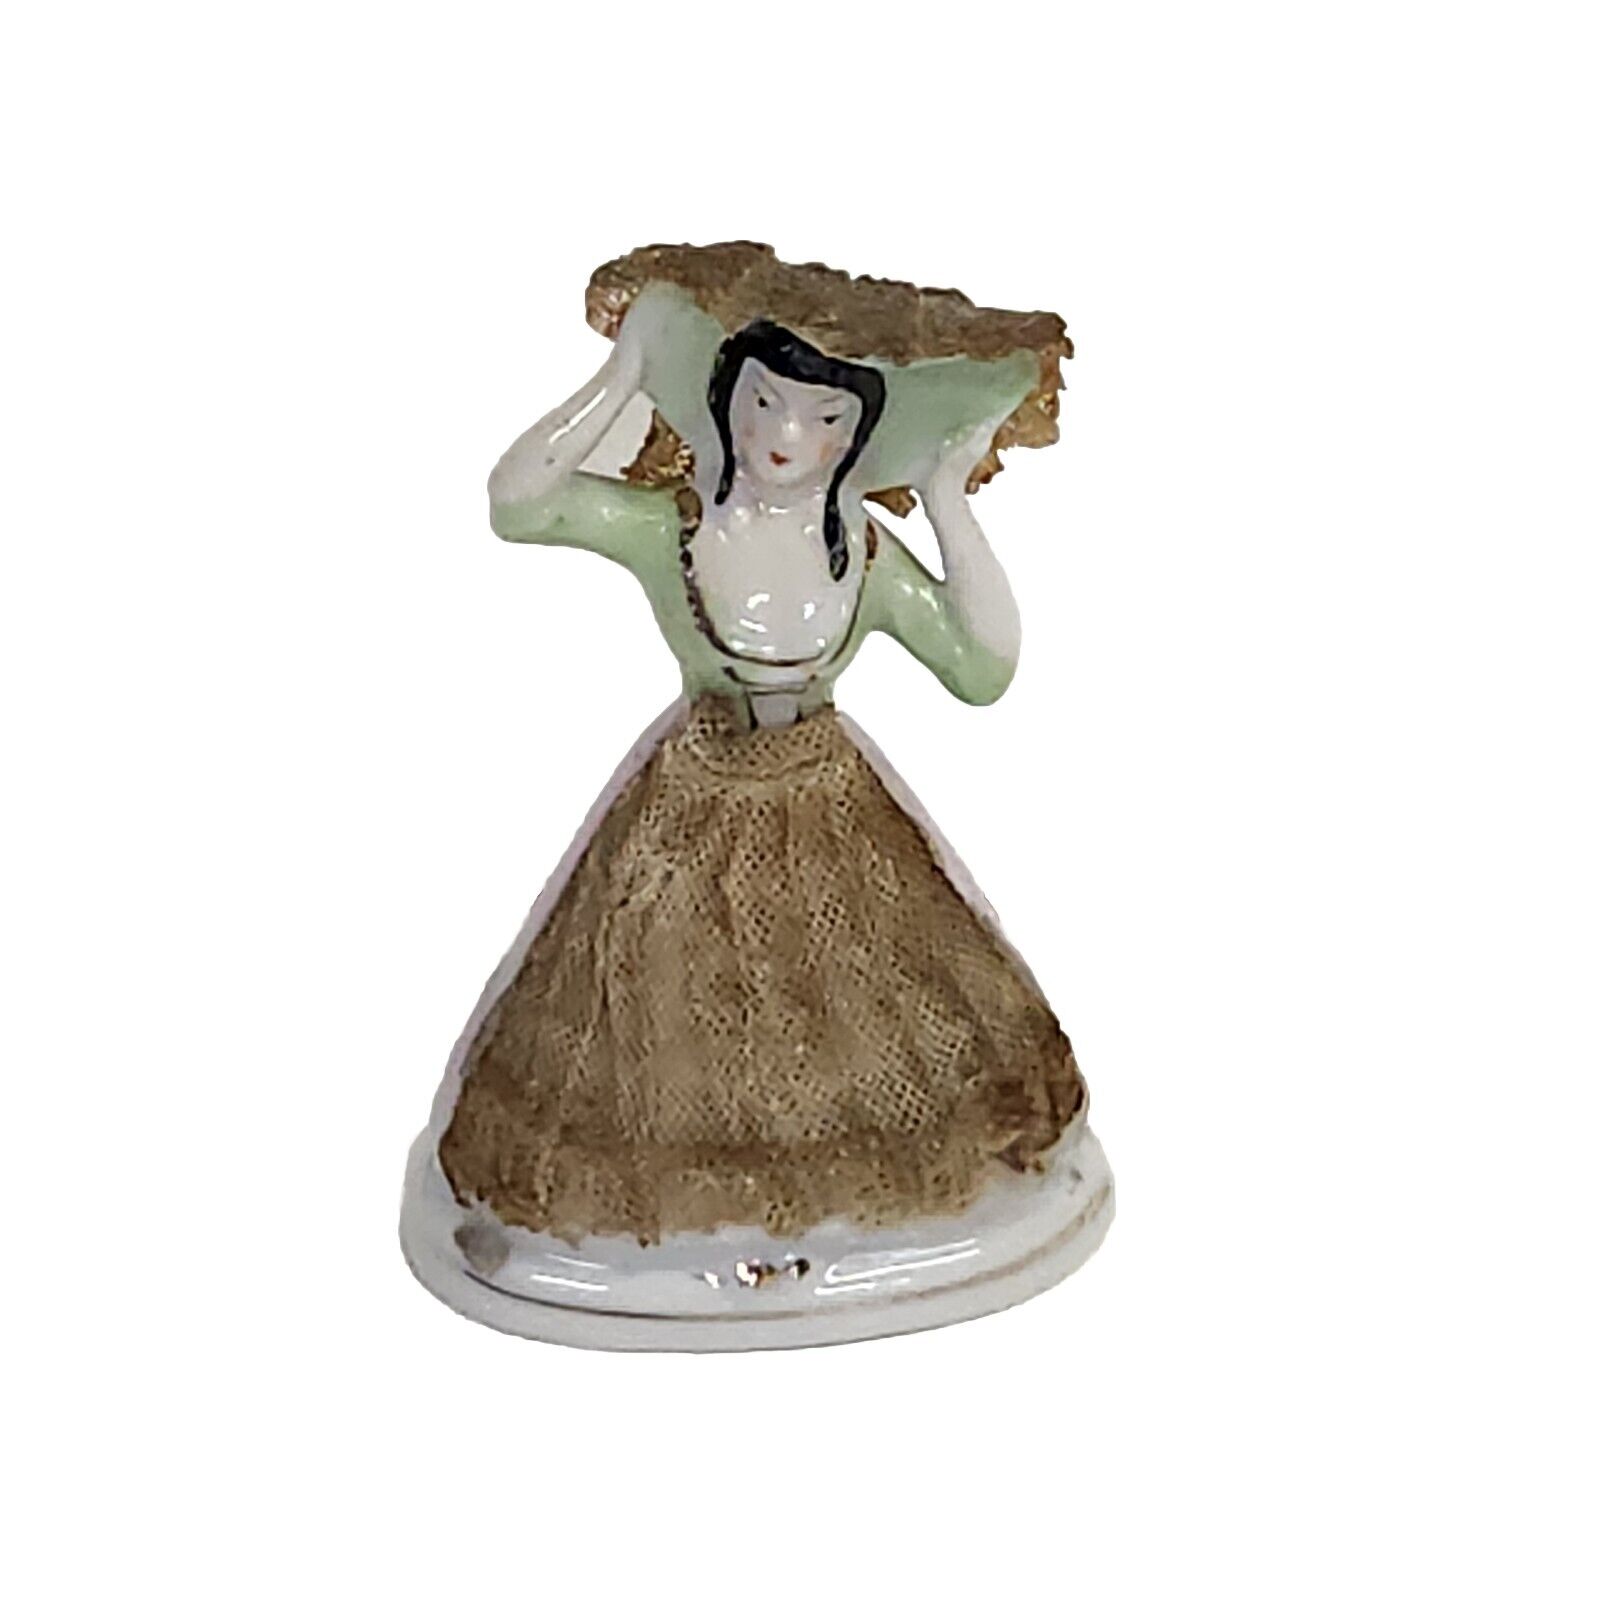 Vintage Lady Figurine From Japan With Green/Brown Dress 